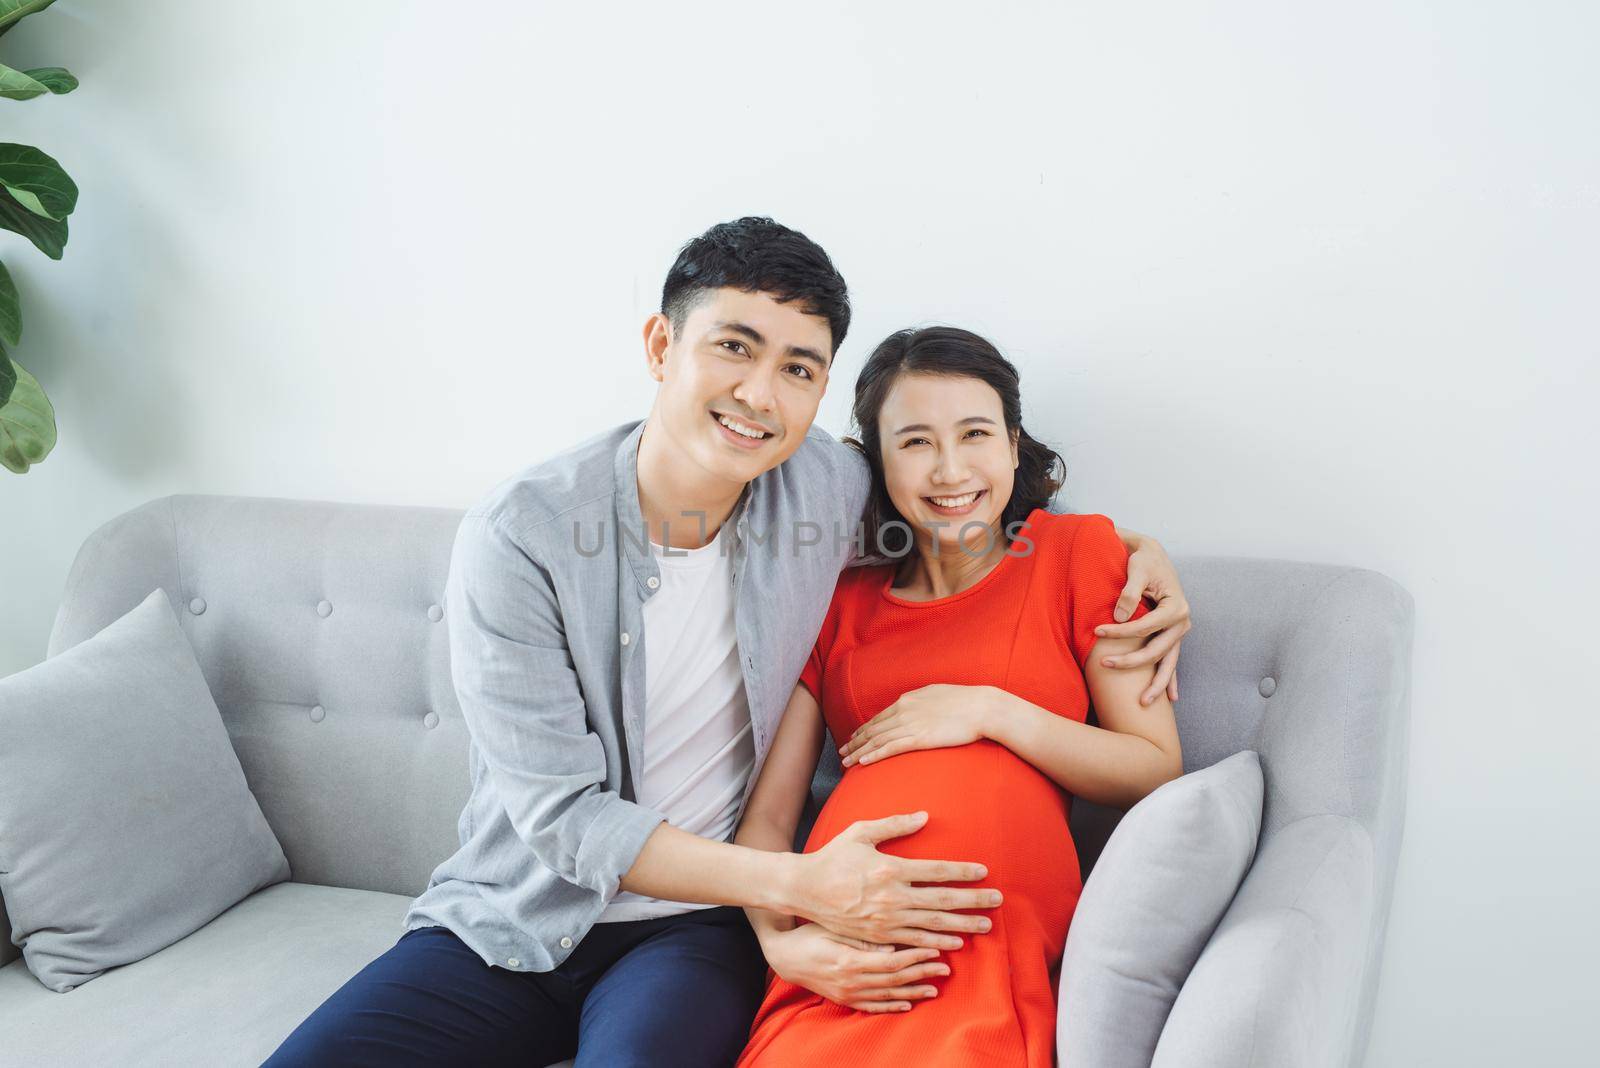 Young couple sitting on couch feeling baby kicking in mother's stomach by makidotvn